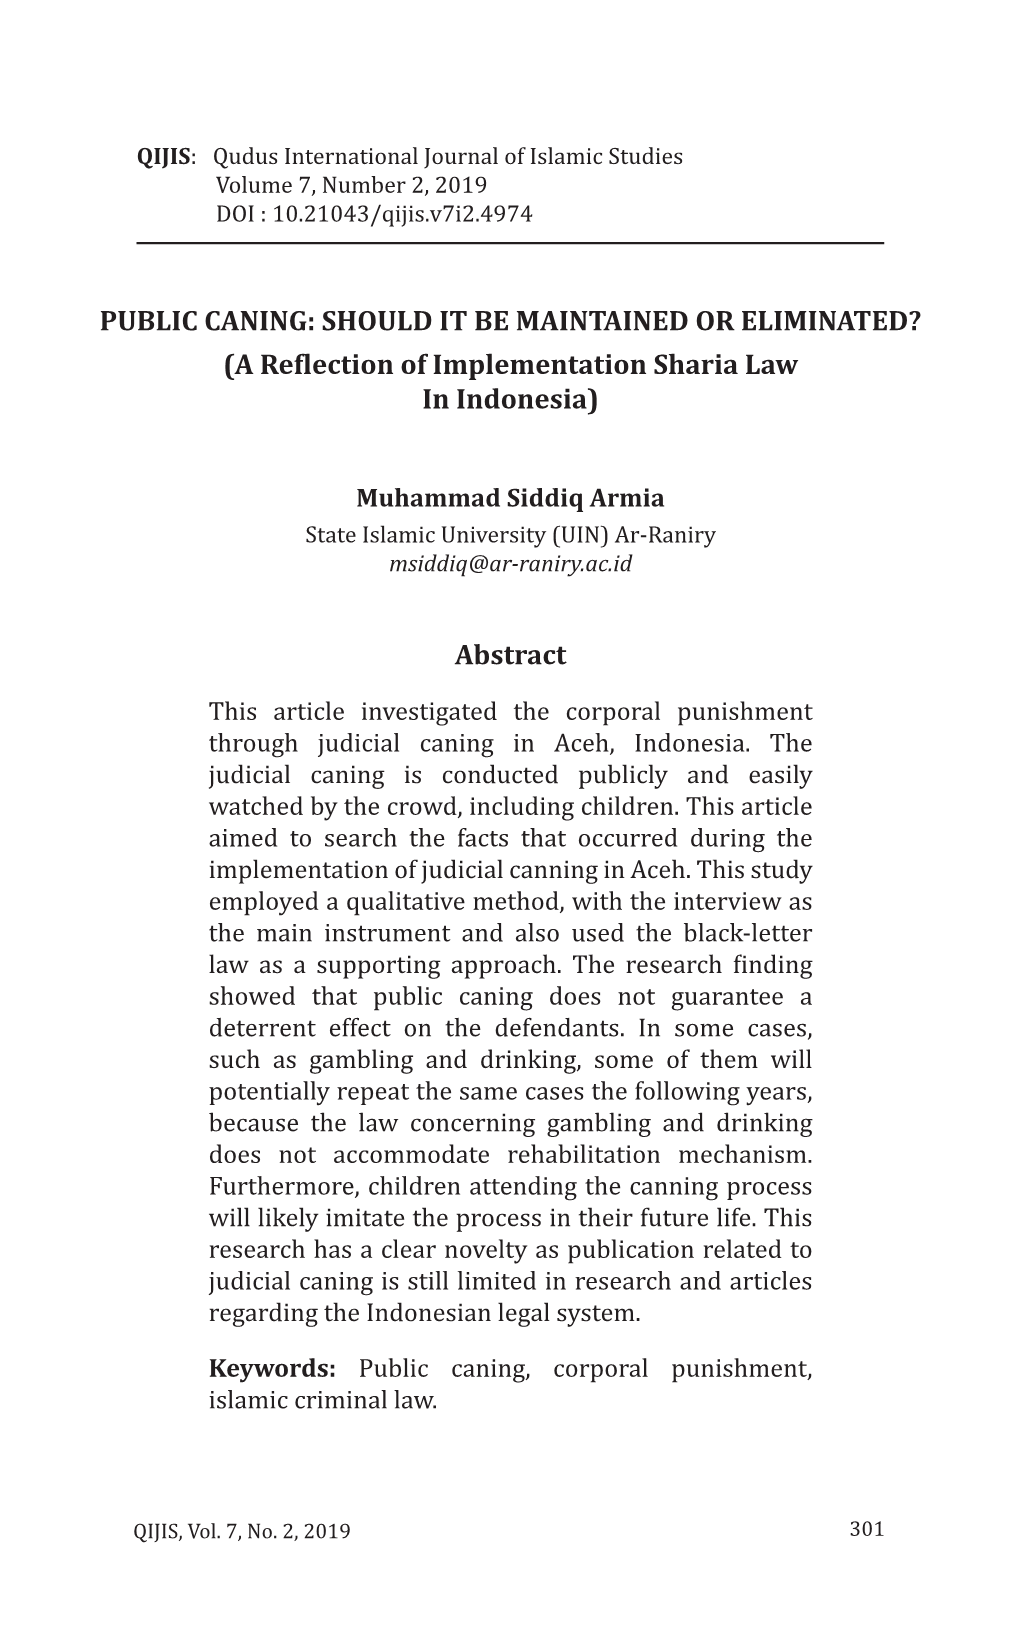 (A Reflection of Implementation Sharia Law in Indonesia) Abstract